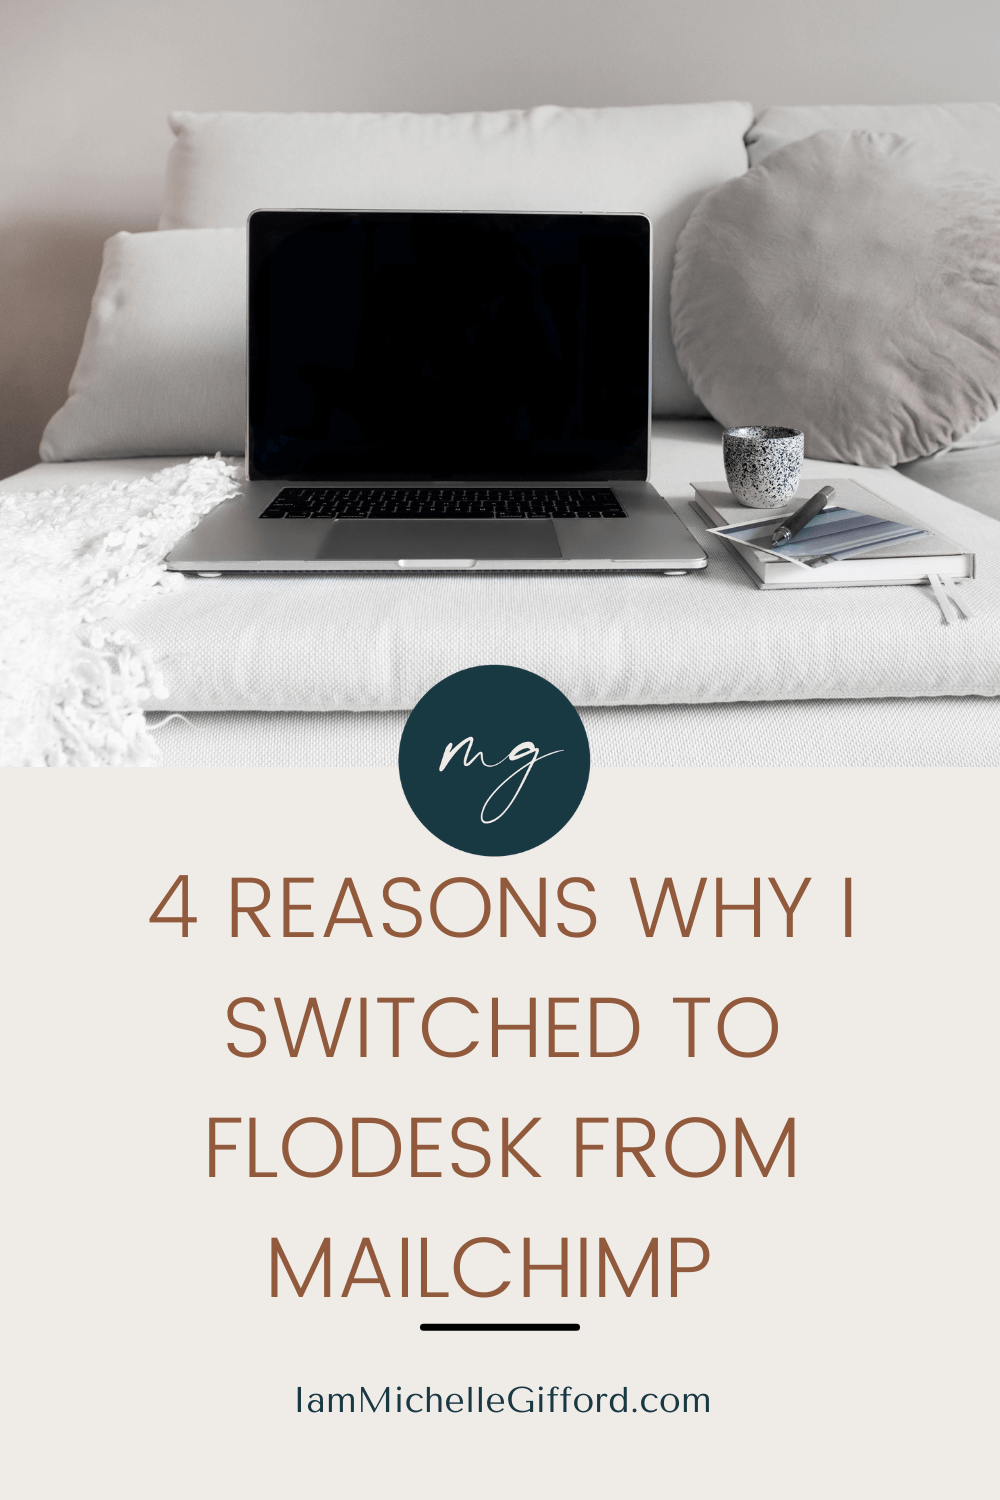 4 Reasons Why I Switched to Flodesk From Mailchimp. Open Laptop resting on sofa. IamMichelleGifford.com